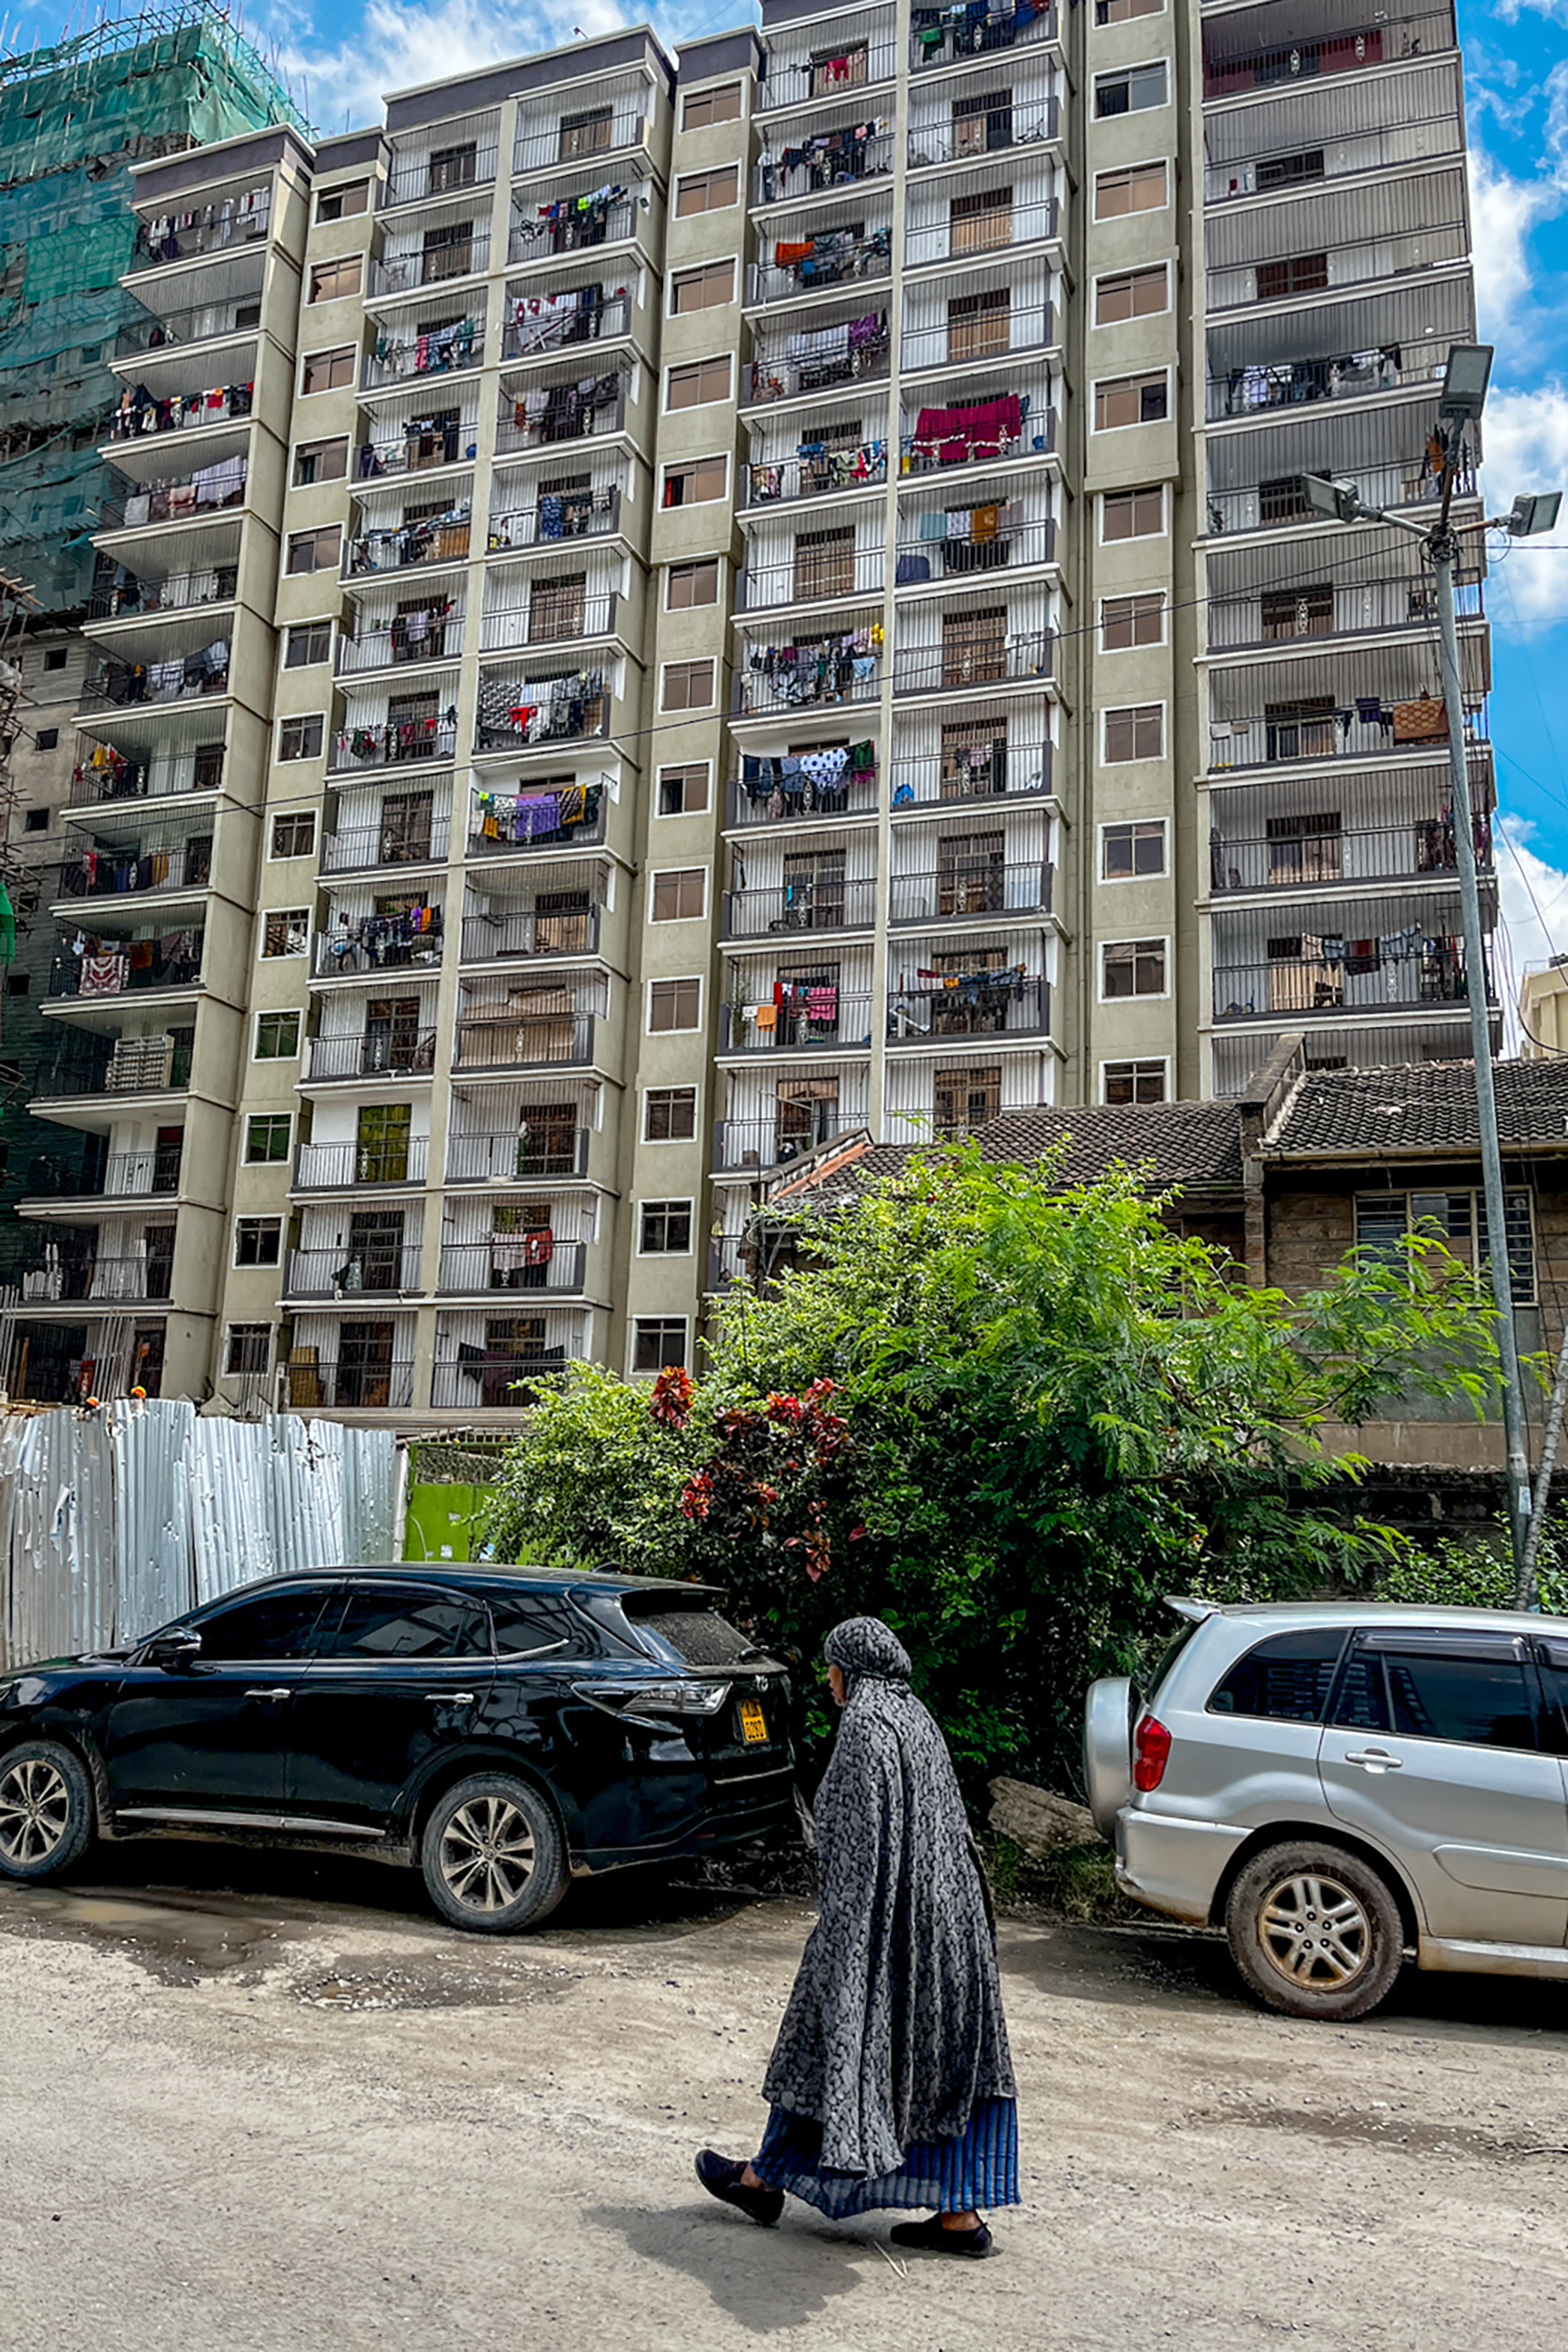 A woman walks by an apartment building in Nairobi’s immigrant-infused neighborhood of Eastleigh.